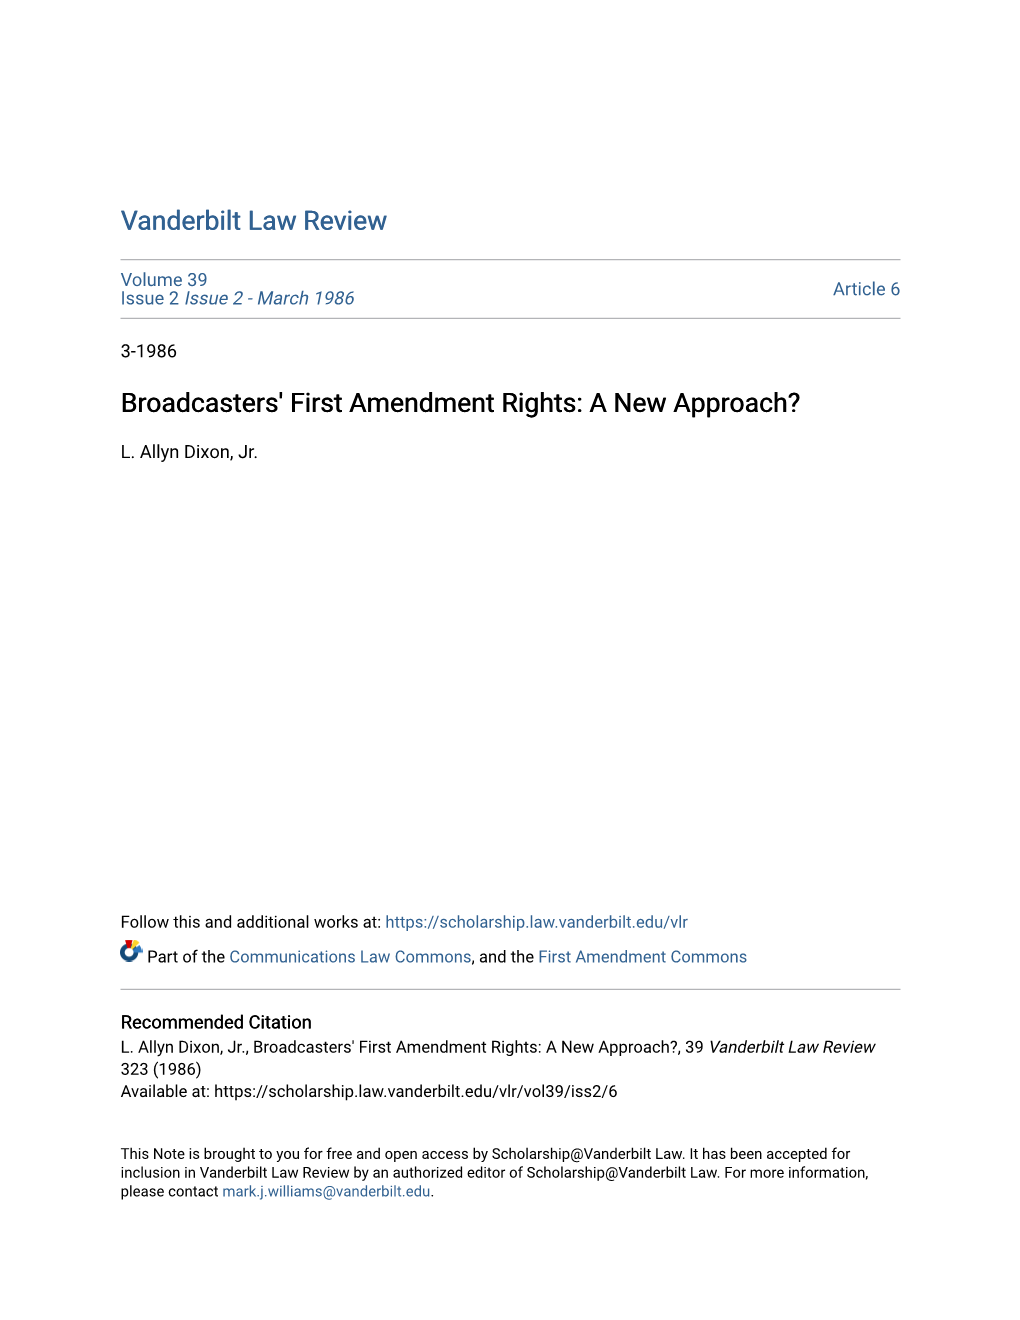 Broadcasters' First Amendment Rights: a New Approach?